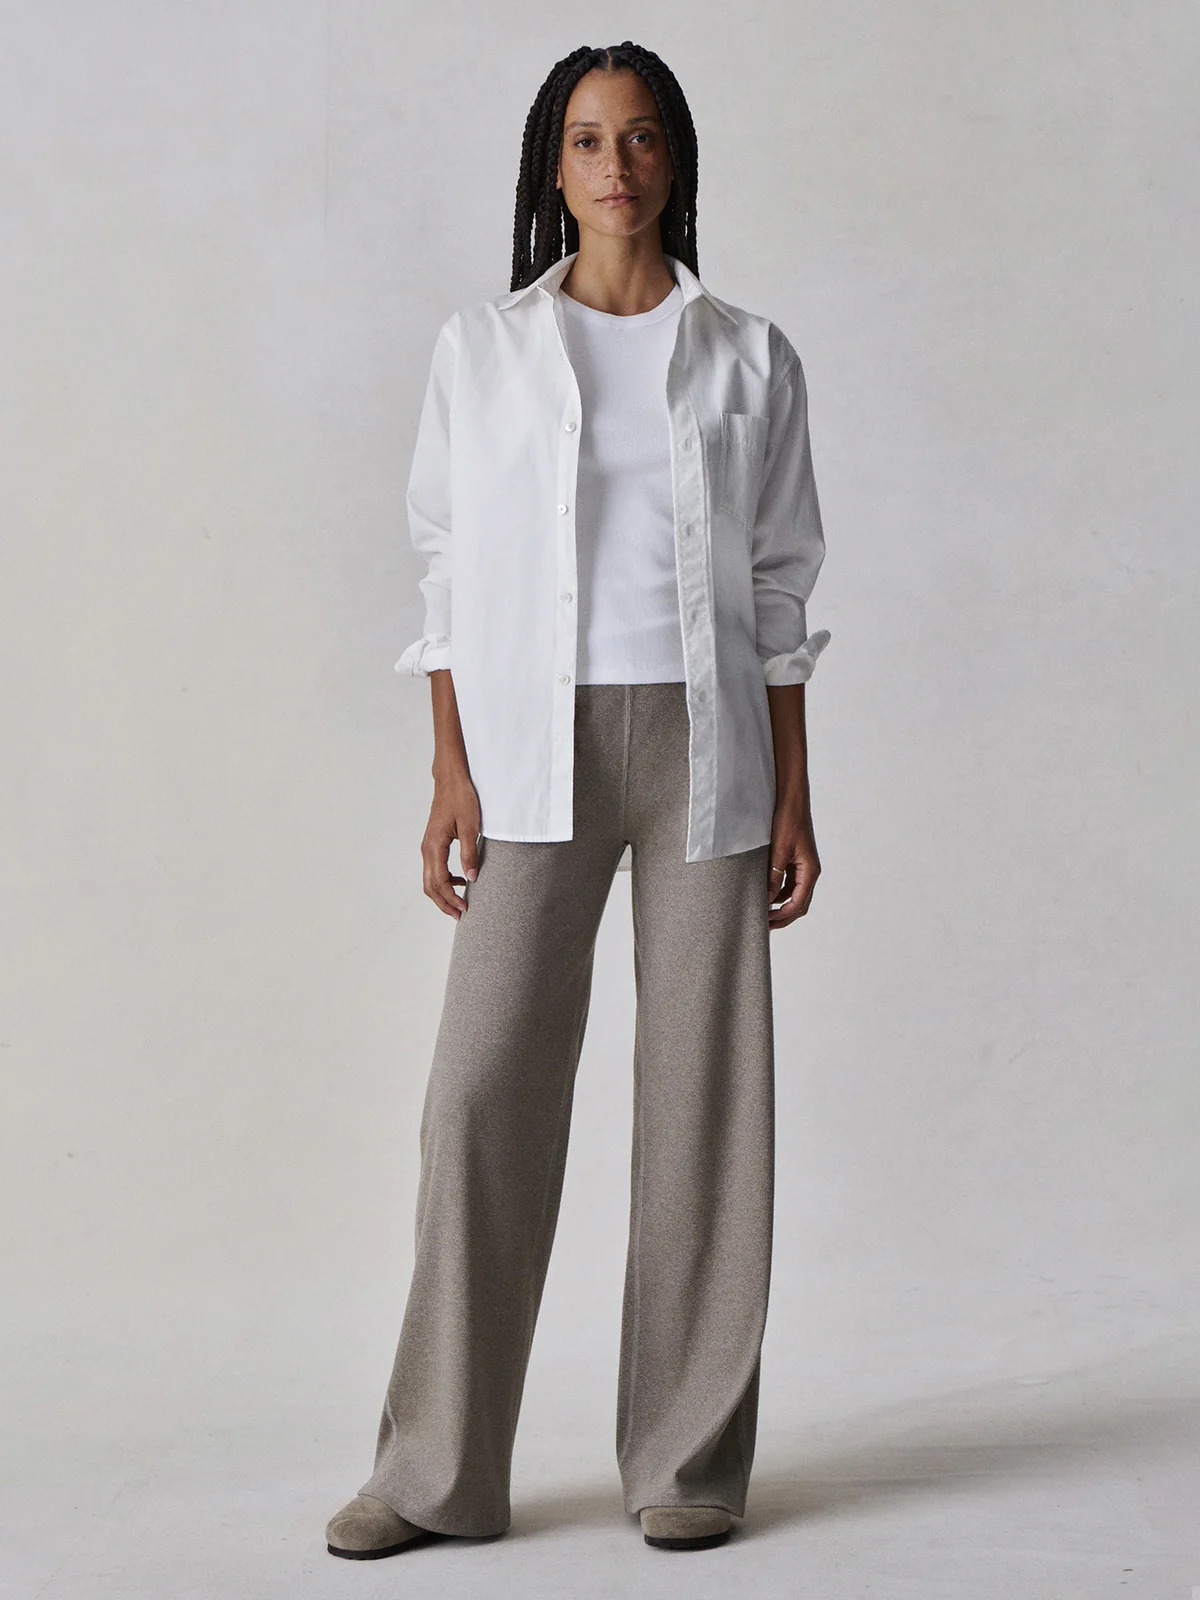 The model is wearing a white shirt and wide leg pants.